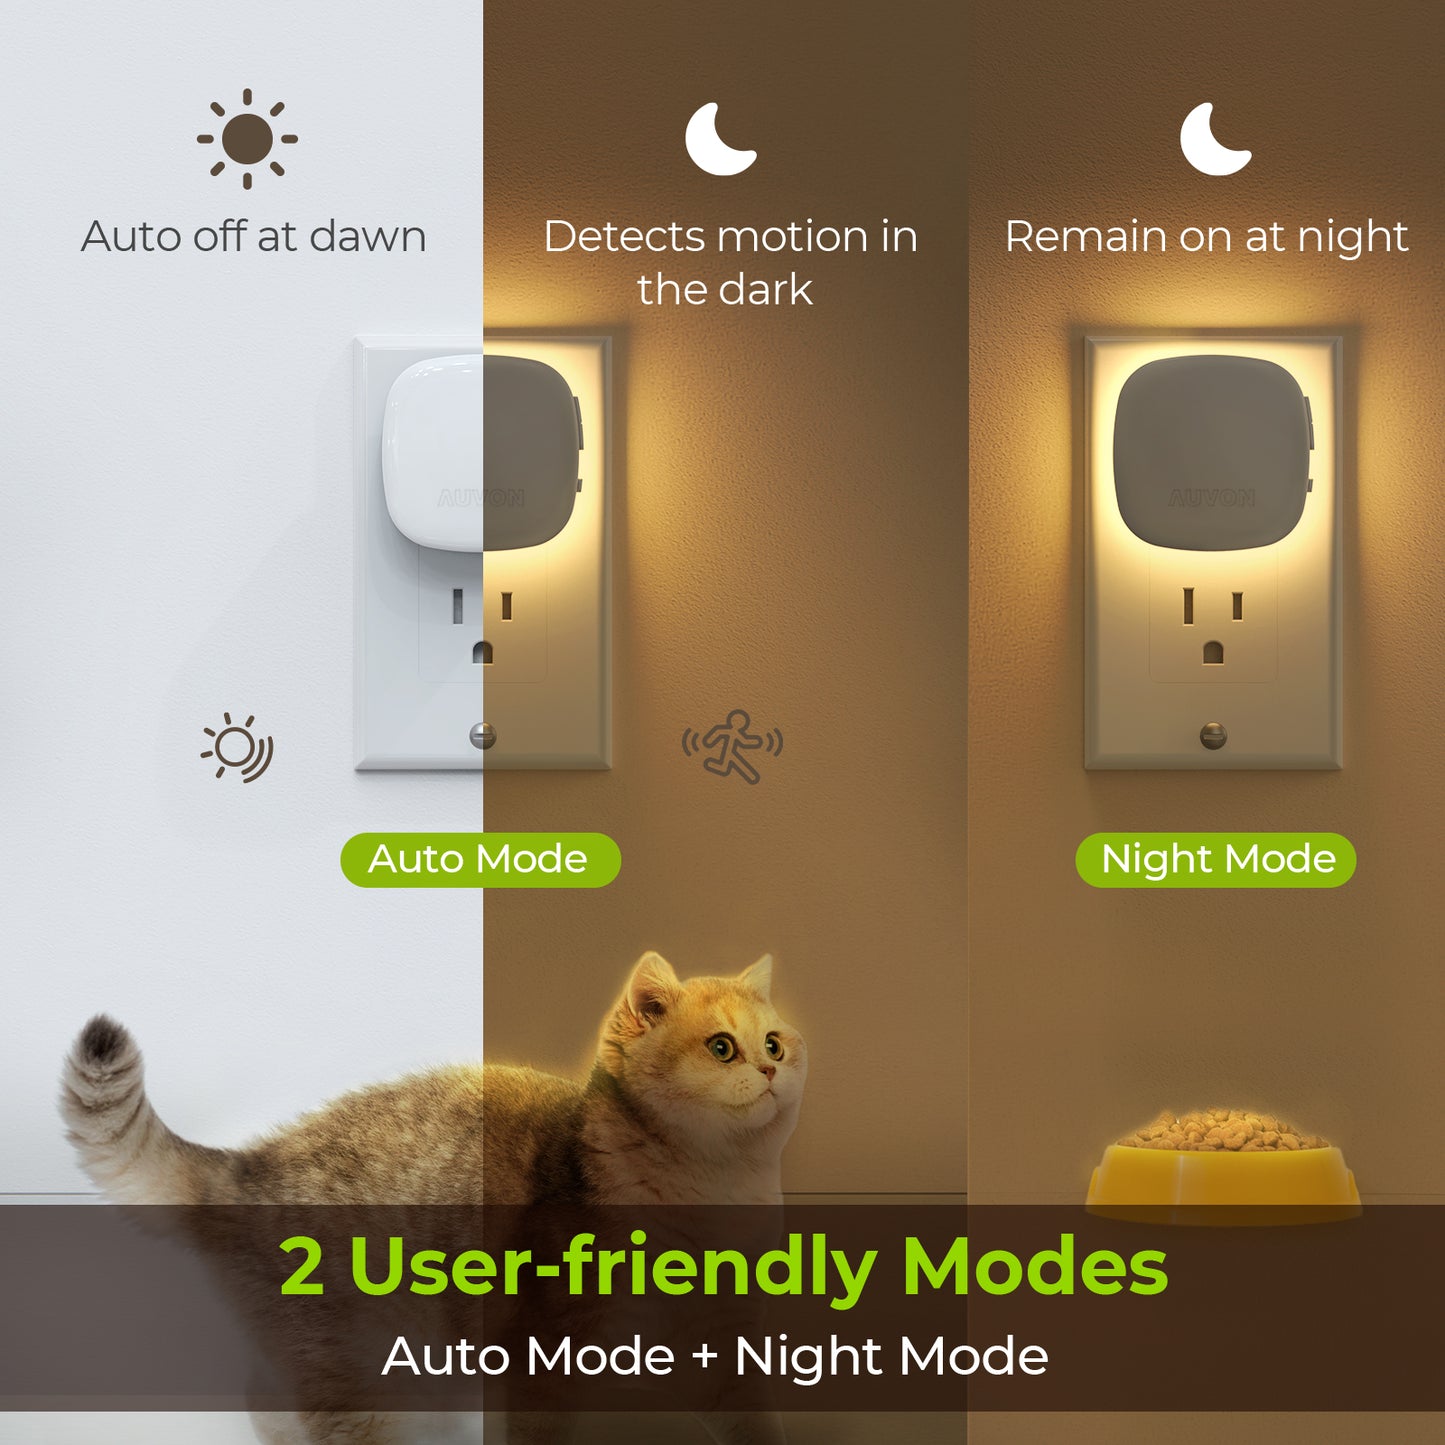 AUVON Plug-in LED Backlit Night Light with Motion Sensor & Dusk to Dawn Sensor, Dimmable Warm White Nightlight with 1-50 lm Adjustable Brightness for Bedroom, Bathroom, Stairs, Hallway (4 Pack)